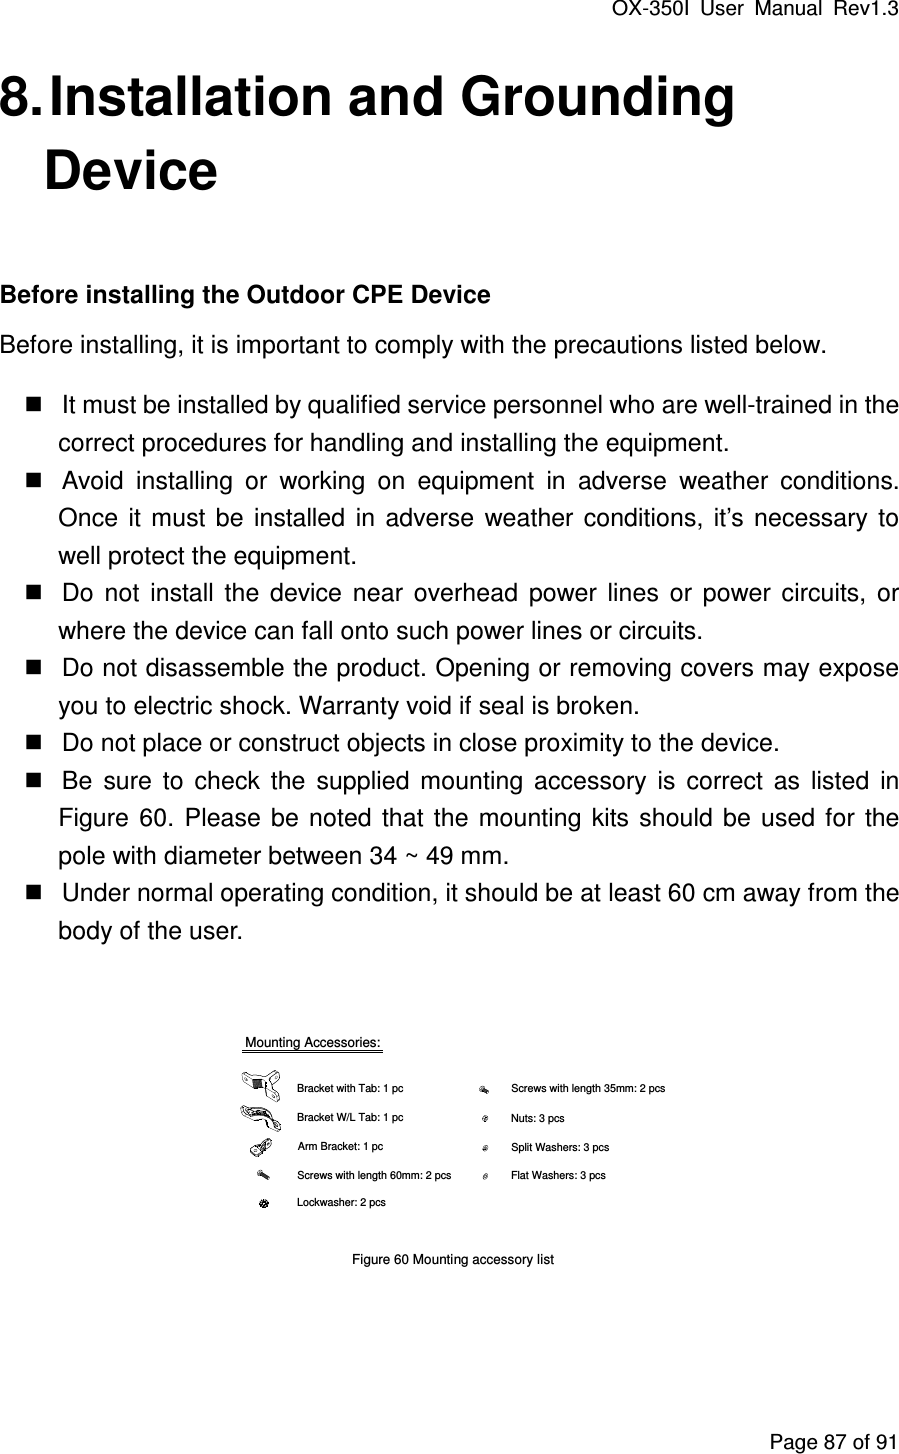 OX-350I  User  Manual  Rev1.3 Page 87 of 91 8. Installation and Grounding Device  Before installing the Outdoor CPE Device Before installing, it is important to comply with the precautions listed below.      It must be installed by qualified service personnel who are well-trained in the correct procedures for handling and installing the equipment.      Avoid  installing  or  working  on  equipment  in  adverse  weather  conditions. Once  it  must  be  installed  in  adverse  weather  conditions,  it’s  necessary  to well protect the equipment.    Do  not  install  the  device  near  overhead  power  lines  or  power  circuits,  or where the device can fall onto such power lines or circuits.    Do not disassemble the product. Opening or removing covers may expose you to electric shock. Warranty void if seal is broken.    Do not place or construct objects in close proximity to the device.      Be  sure  to  check  the  supplied  mounting  accessory  is  correct  as  listed  in Figure  60.  Please  be  noted  that  the  mounting  kits  should  be  used  for  the pole with diameter between 34 ~ 49 mm.    Under normal operating condition, it should be at least 60 cm away from the body of the user.    Mounting Accessories:Bracket with Tab: 1 pcBracket W/L Tab: 1 pcArm Bracket: 1 pcScrews with length 60mm: 2 pcsScrews with length 35mm: 2 pcsNuts: 3 pcsSplit Washers: 3 pcsFlat Washers: 3 pcsLockwasher: 2 pcs Figure 60 Mounting accessory list   